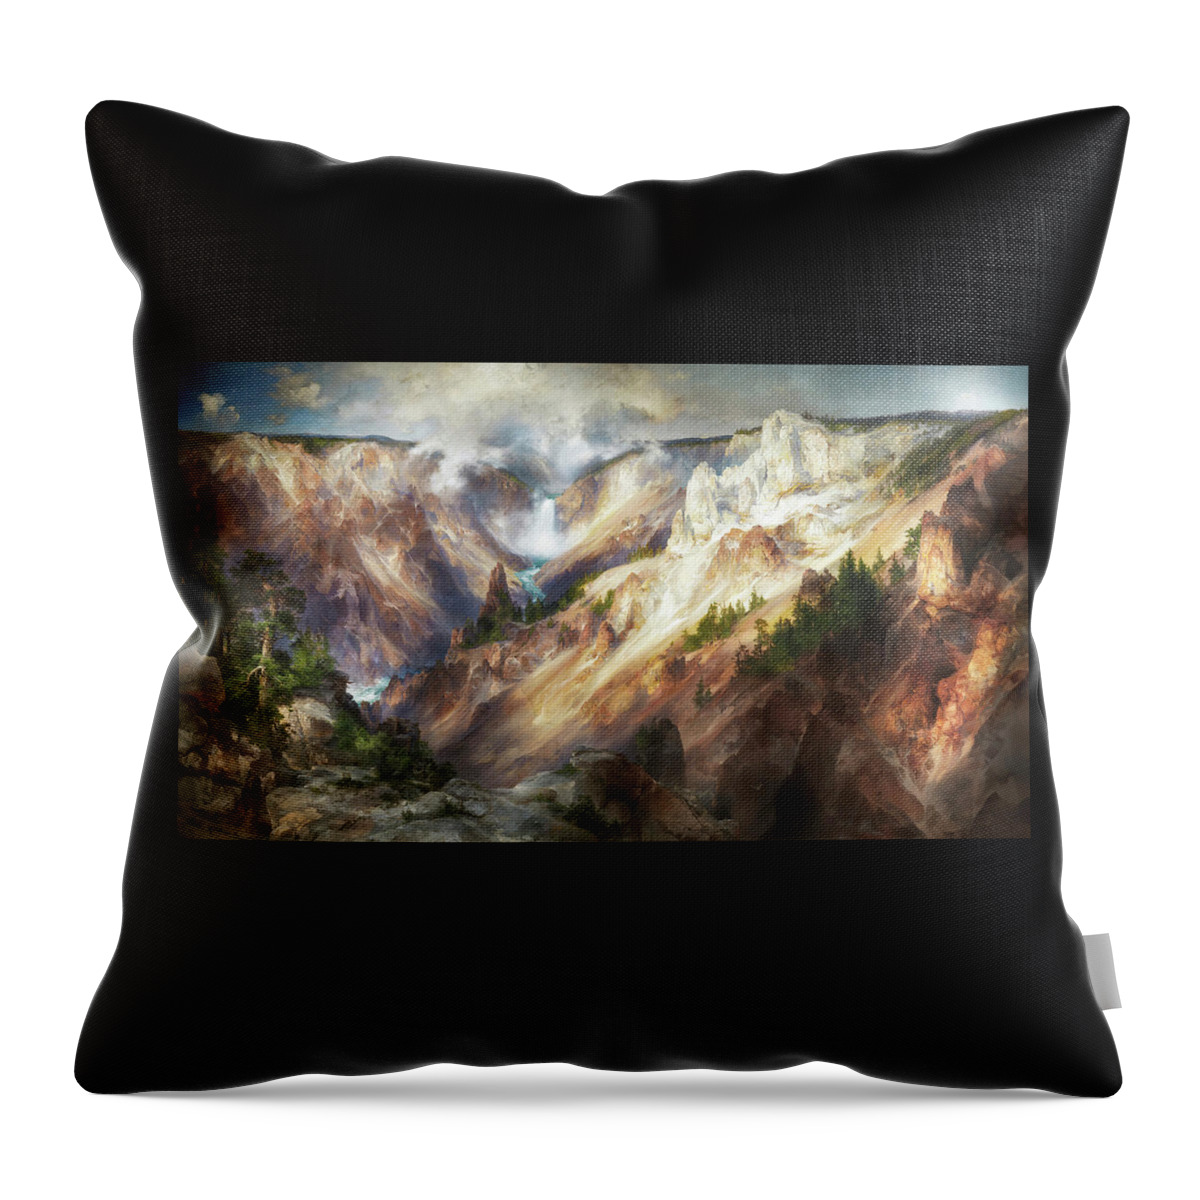 The Grand Canyon Of The Yellowstone Throw Pillow featuring the painting The Grand Canyon of the Yellowstone by Thomas Moran 1893 by Thomas moran